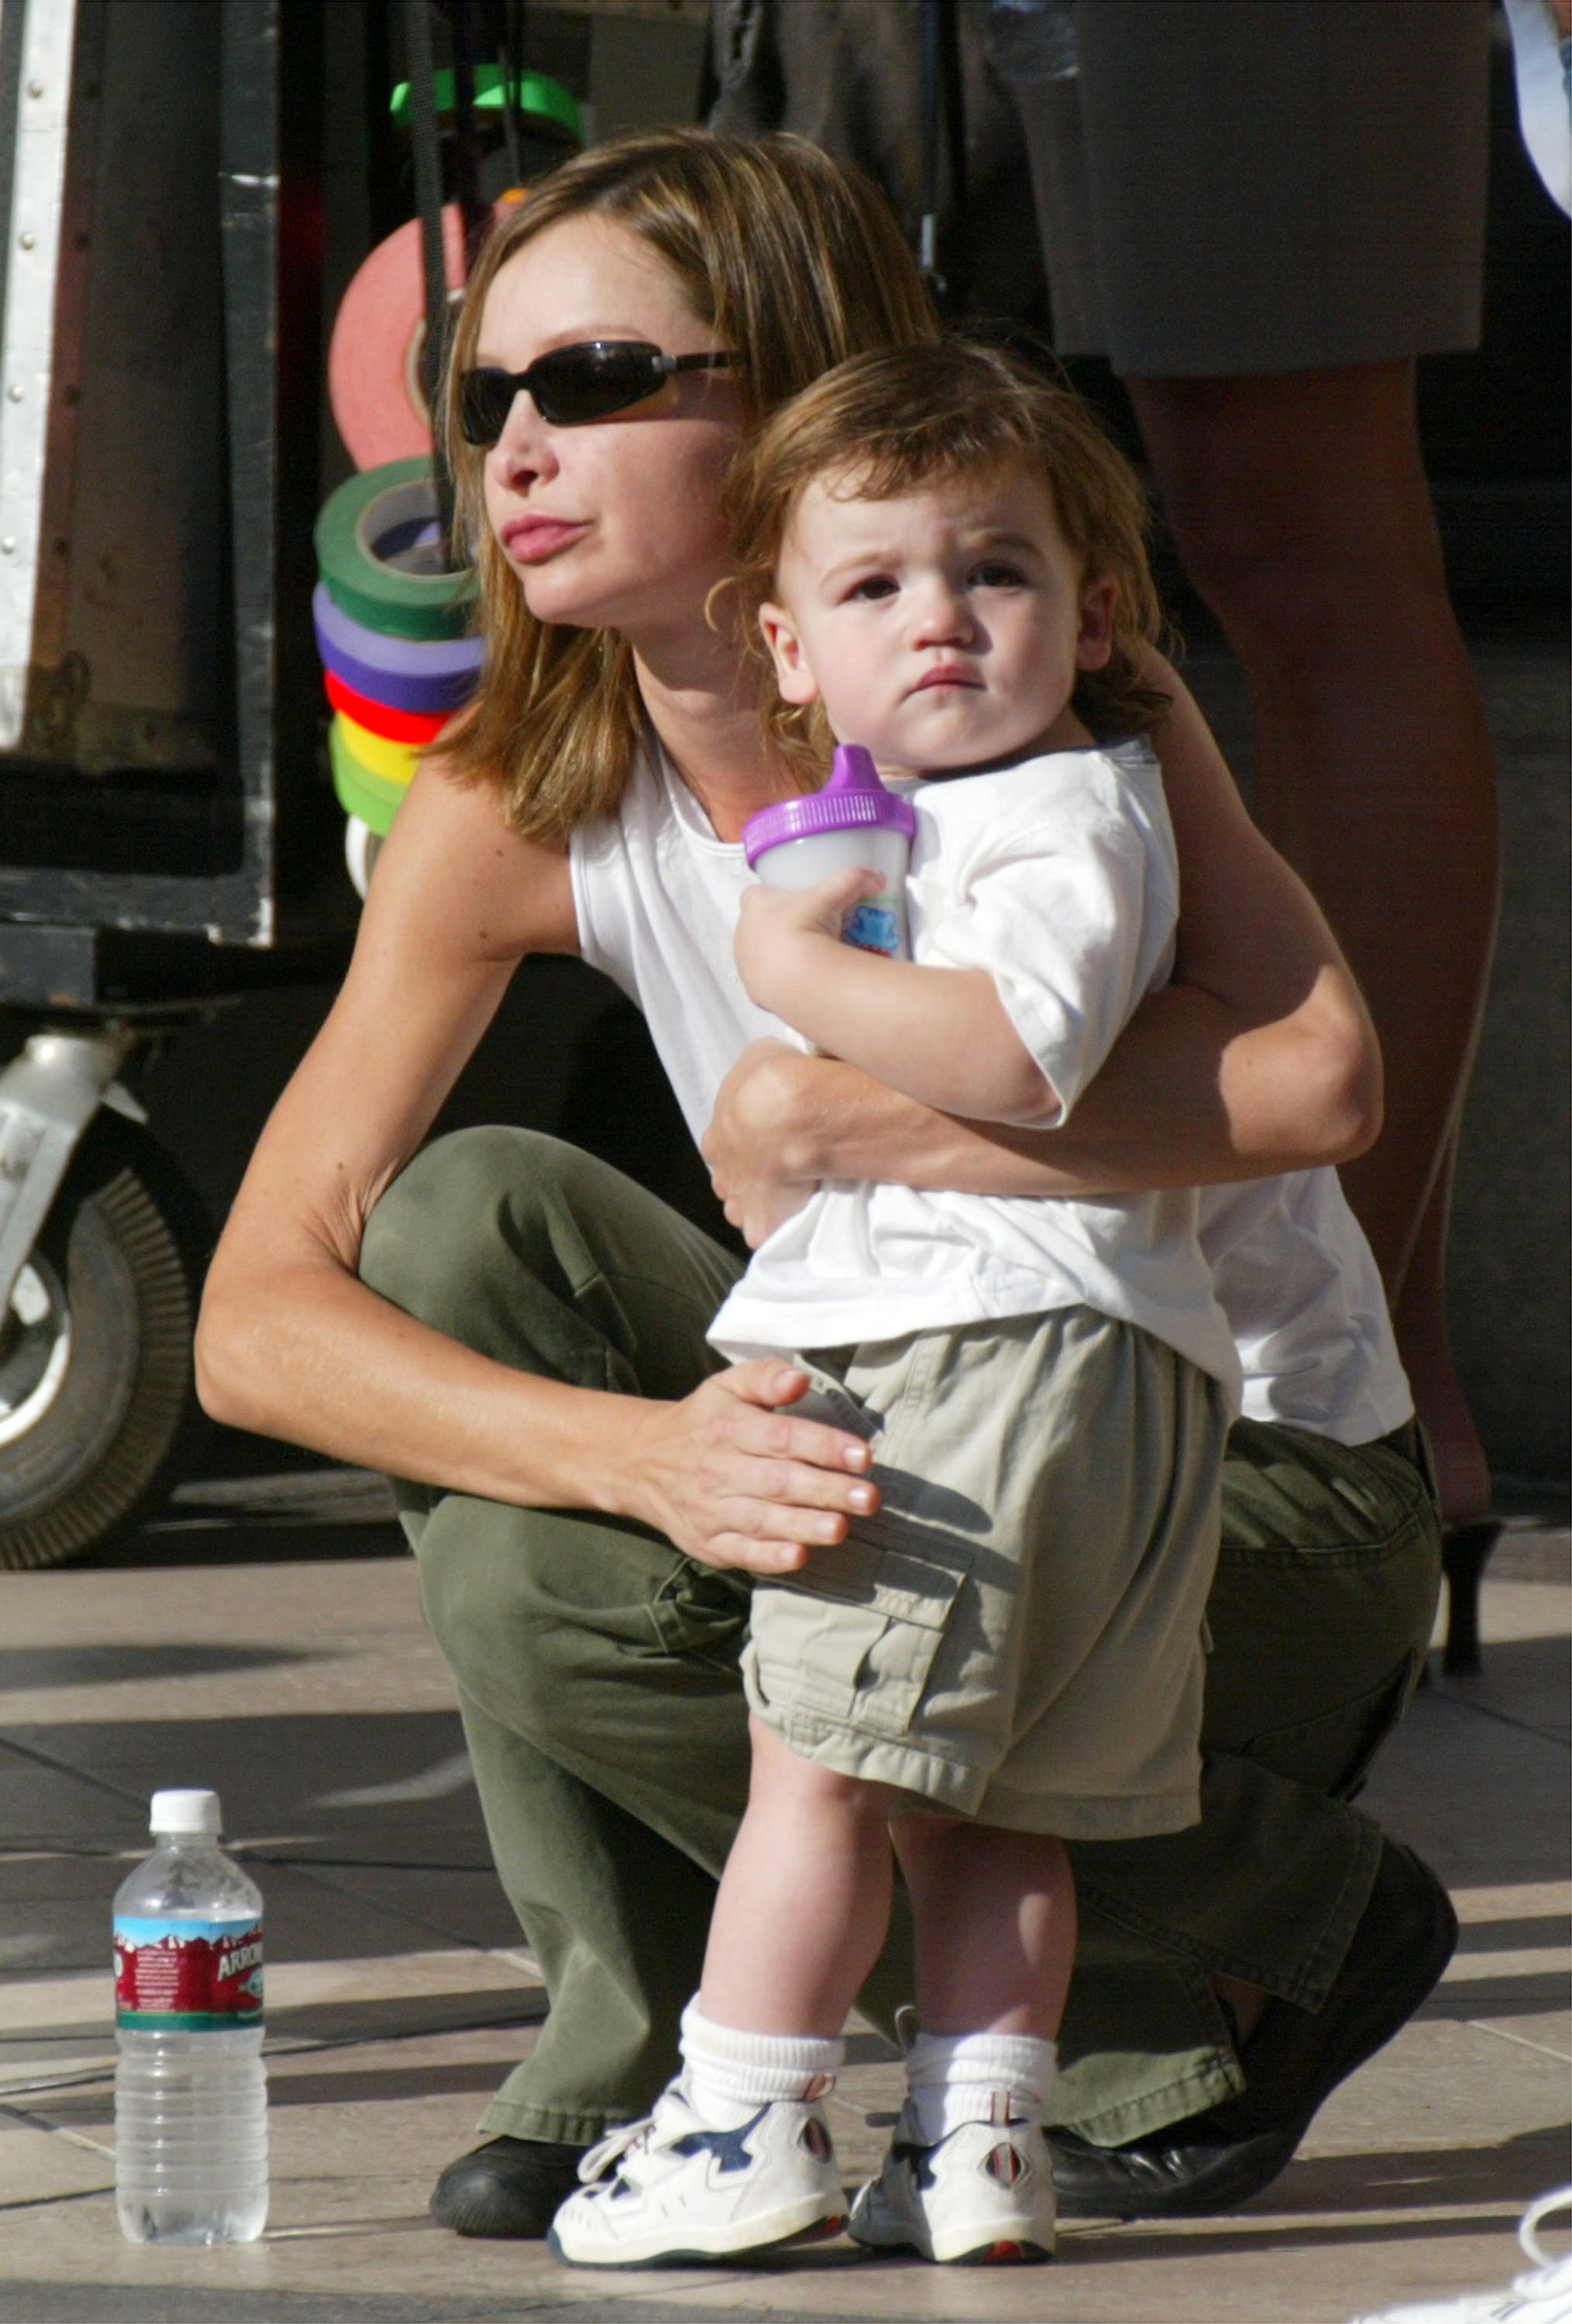 Calista Flockhart and her son, Liam, on the set of Harrison Ford's upcoming movie, "Two Cops" on September 17, 2002, in Beverly Hills, California | Source: Getty Images